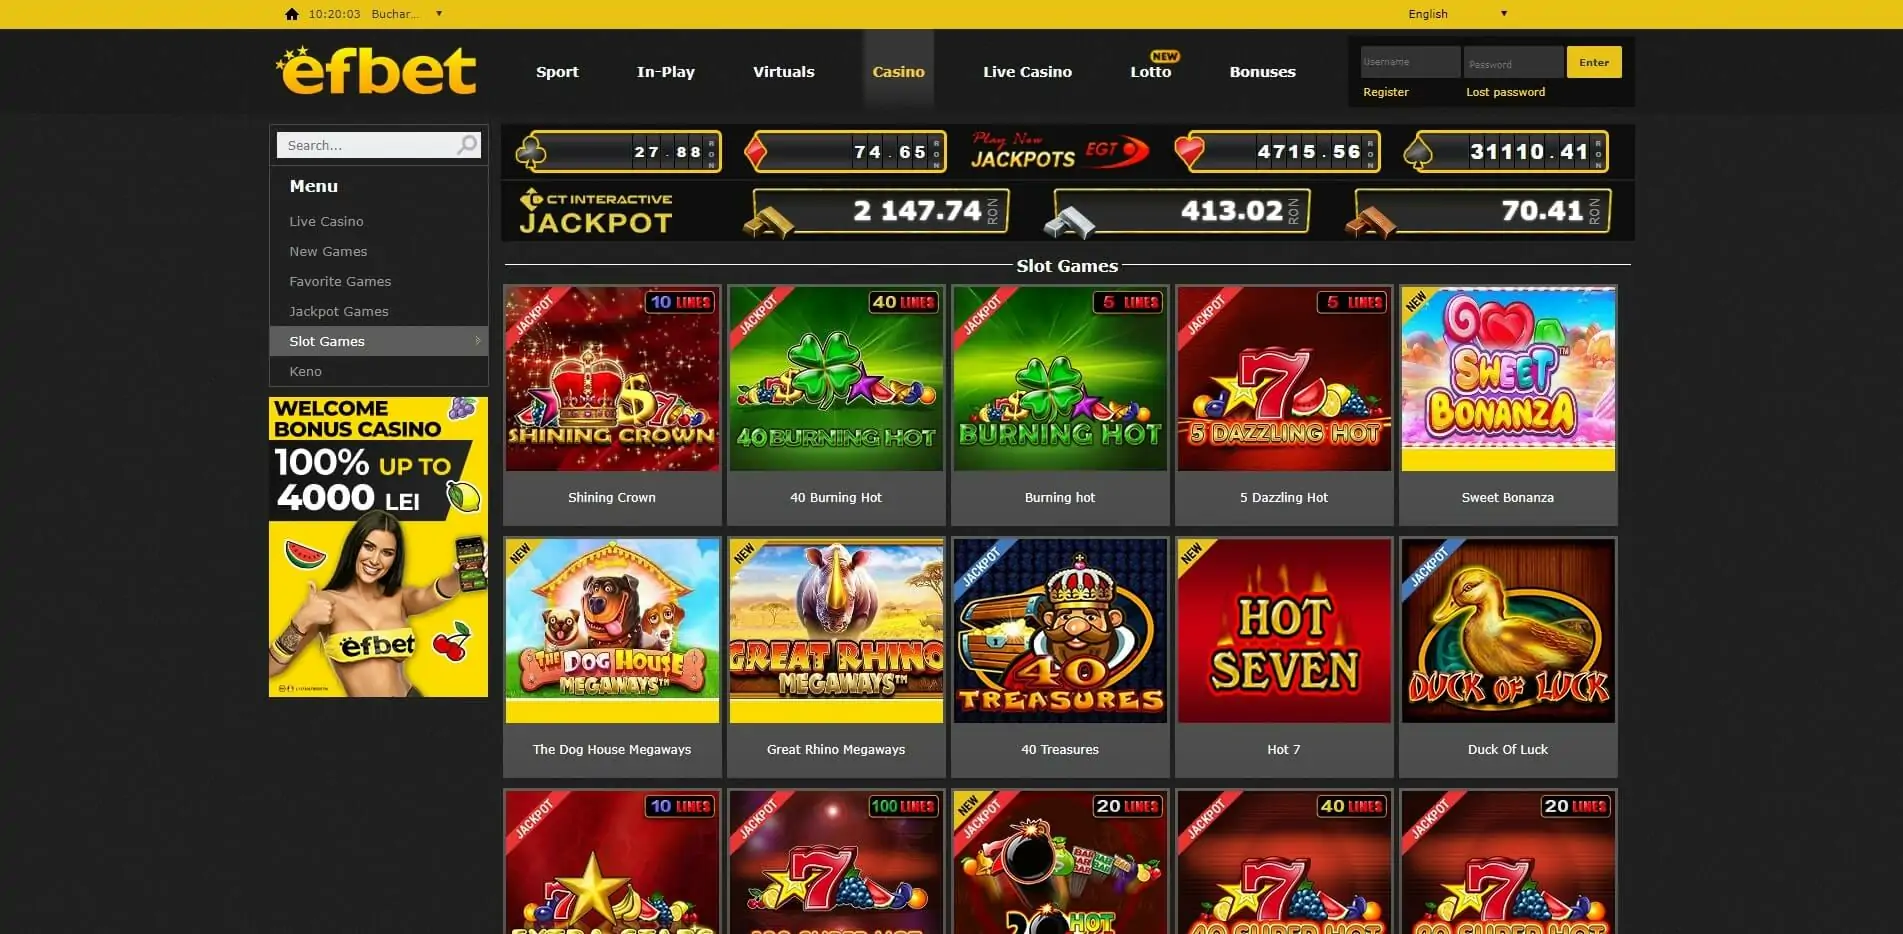 online casino - How To Be More Productive?